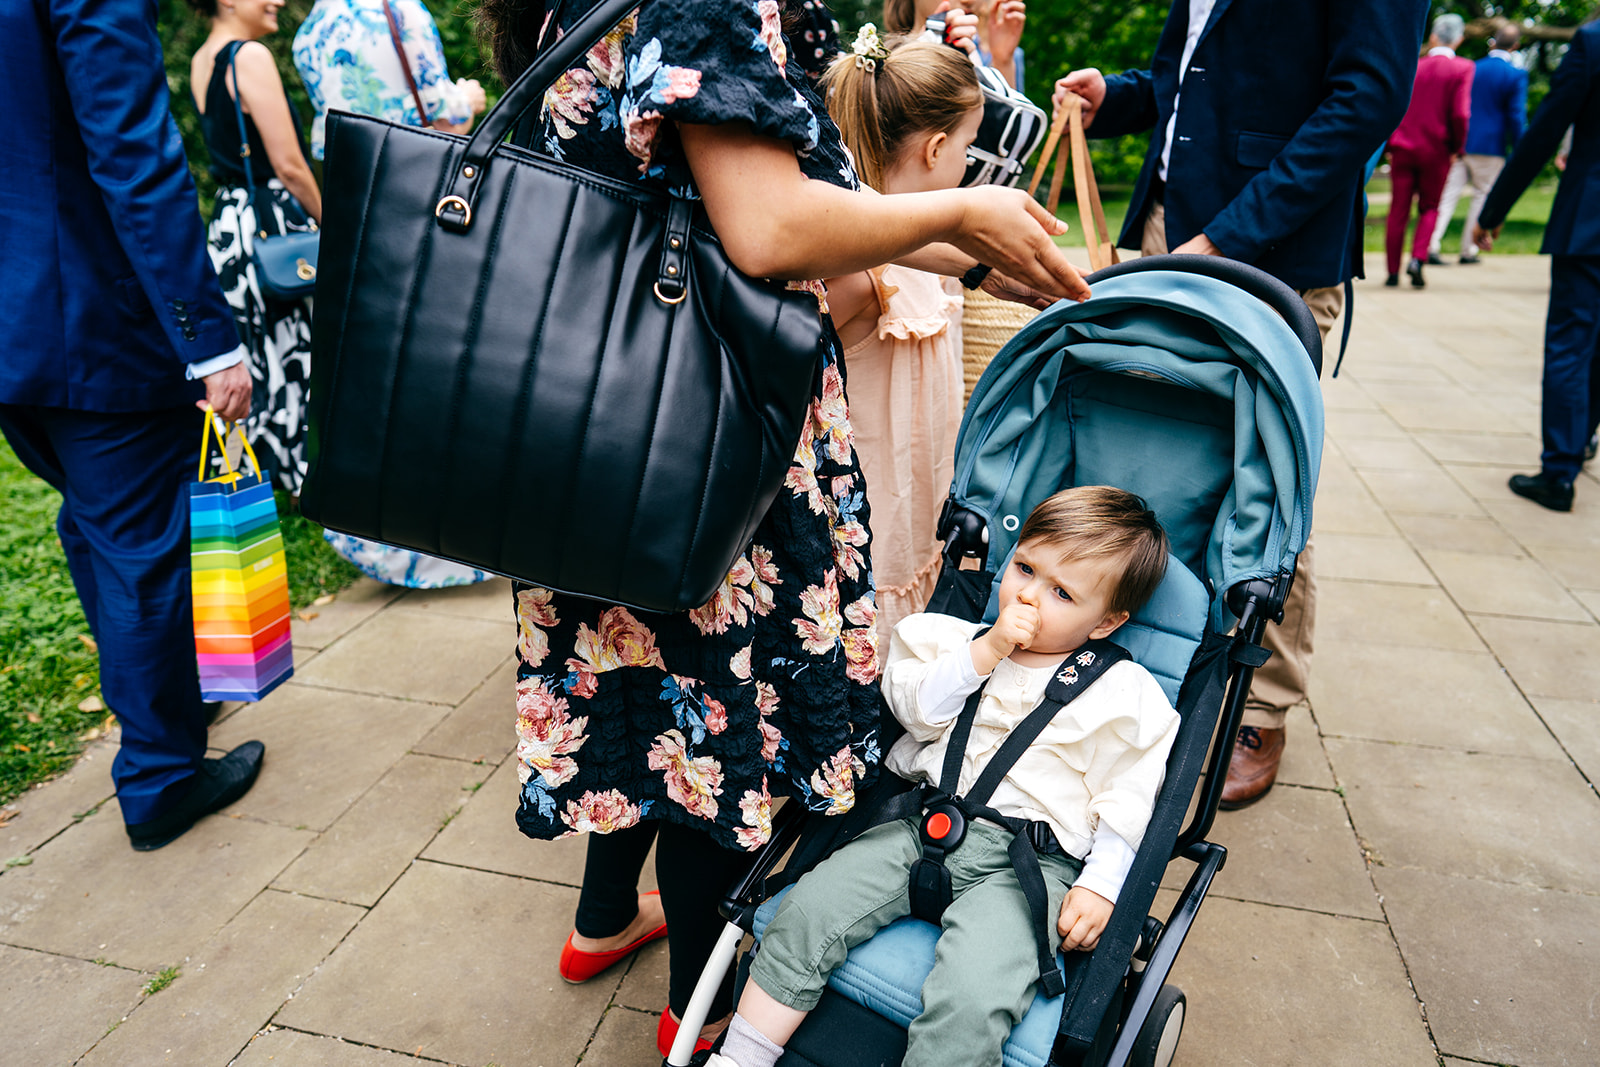 Guests arrive for Twickenham Wedding - baby boy sucking his thumb in pushchair 